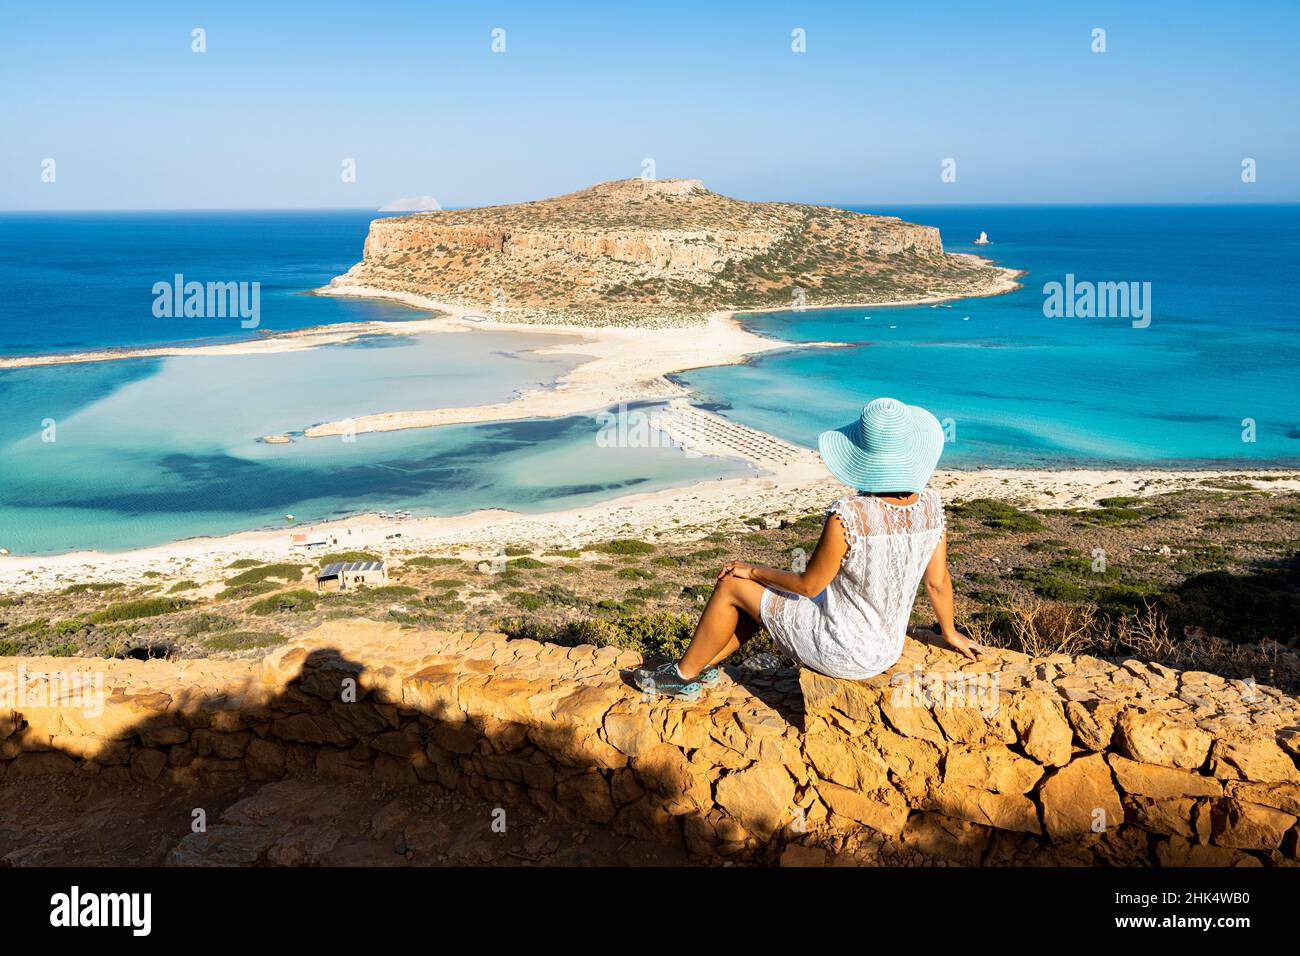 Charming woman with sundress and hat contemplating the crystal turquoise sea and lagoon, Balos, Crete, Greek Islands, Greece, Europe Stock Photo